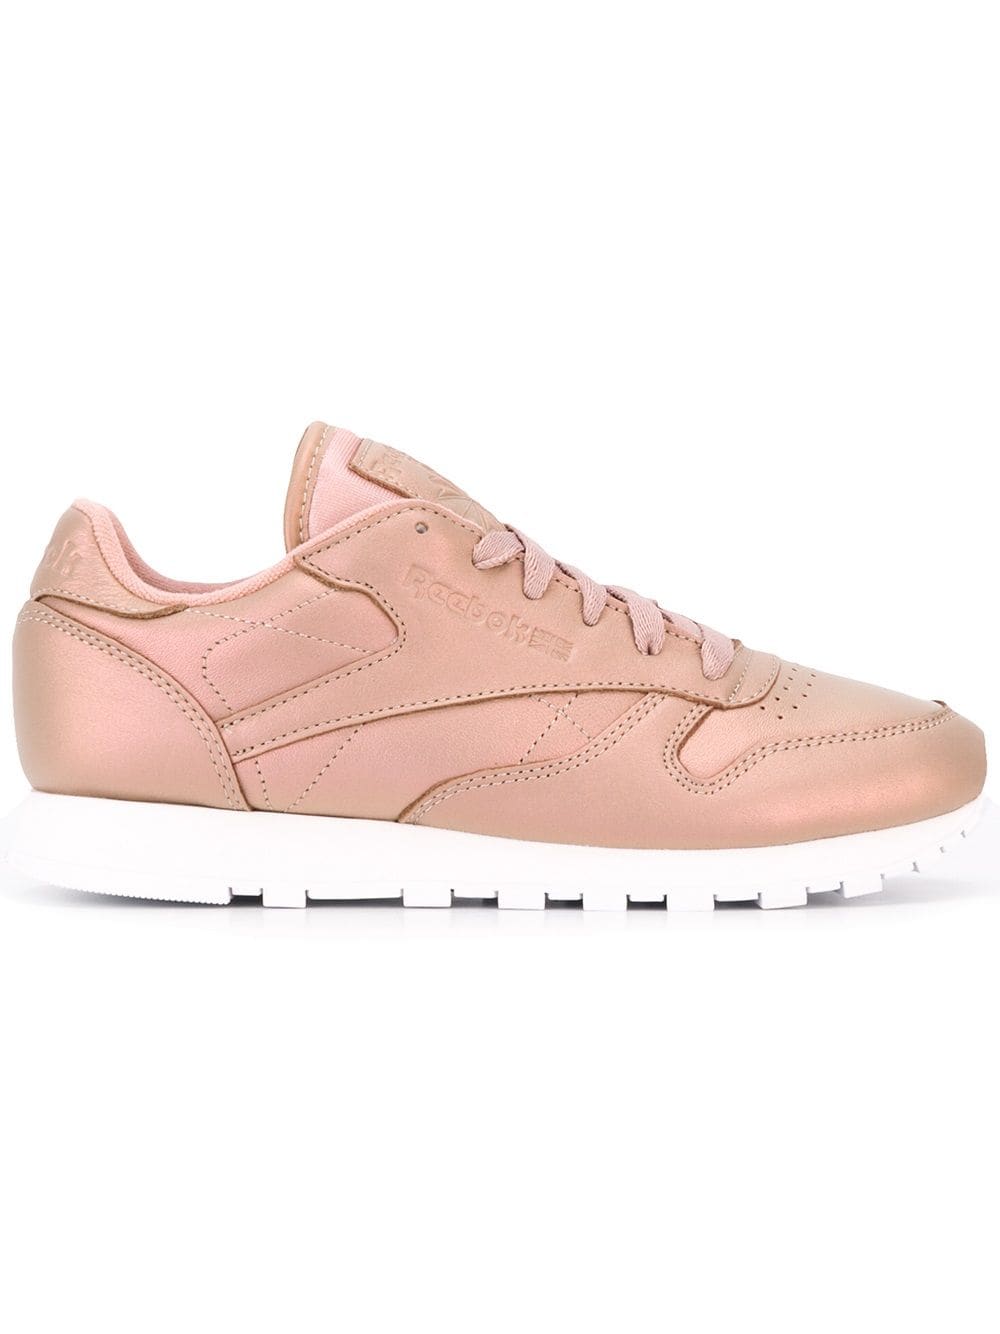 Reebok Classic leather pearlized sneakers - Pink von Reebok